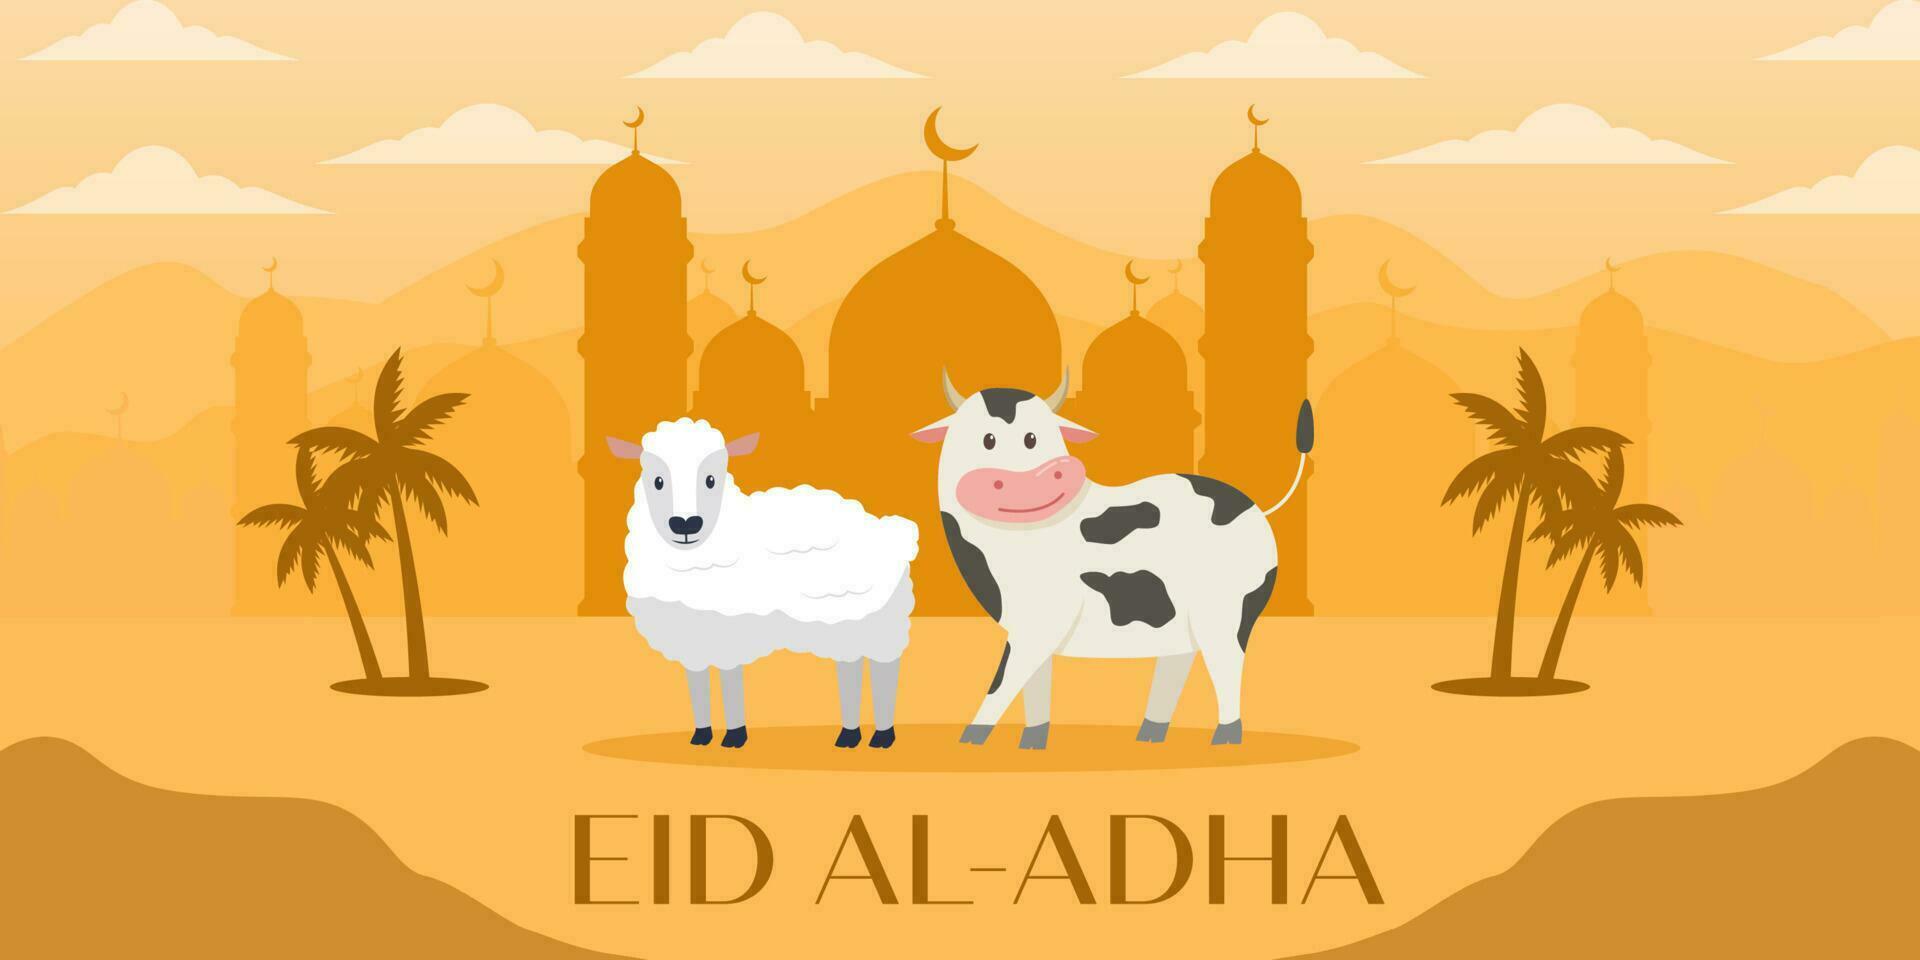 eid al adha mubarak banner illustration with sheep and cow on silhouette mosque background vector